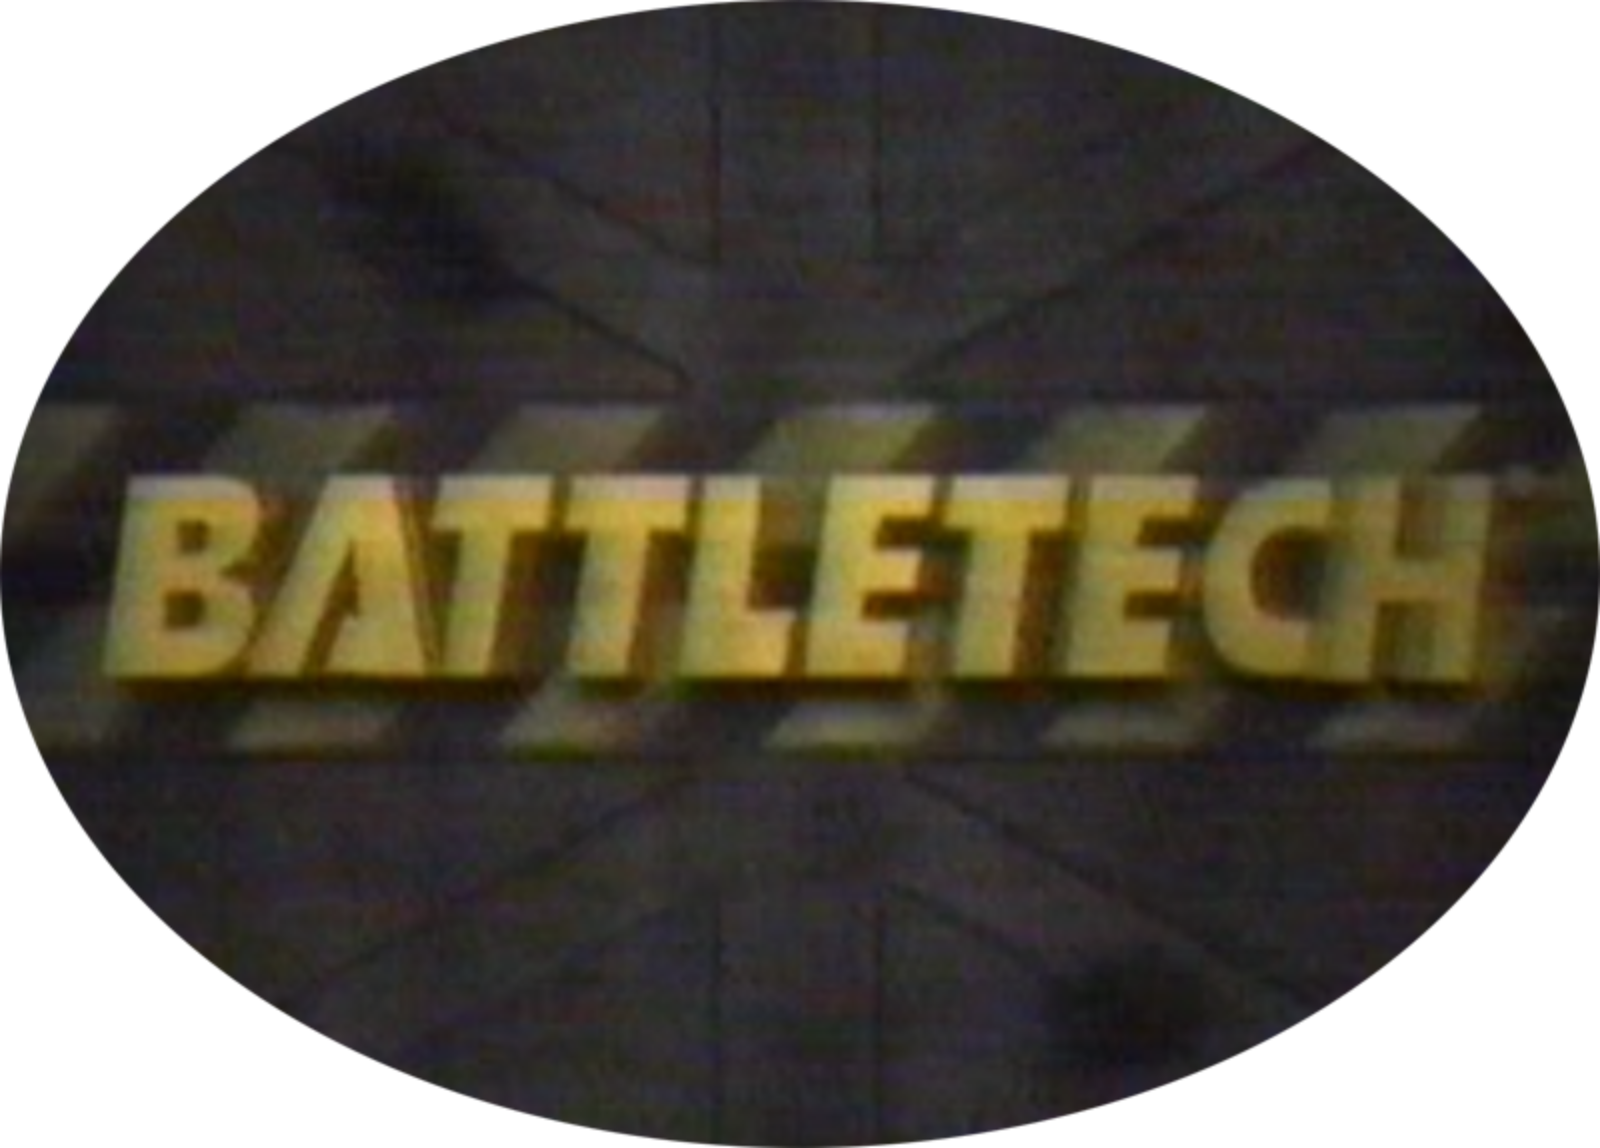 BattleTech: The Animated Series Complete (2 DVDs Box Set)